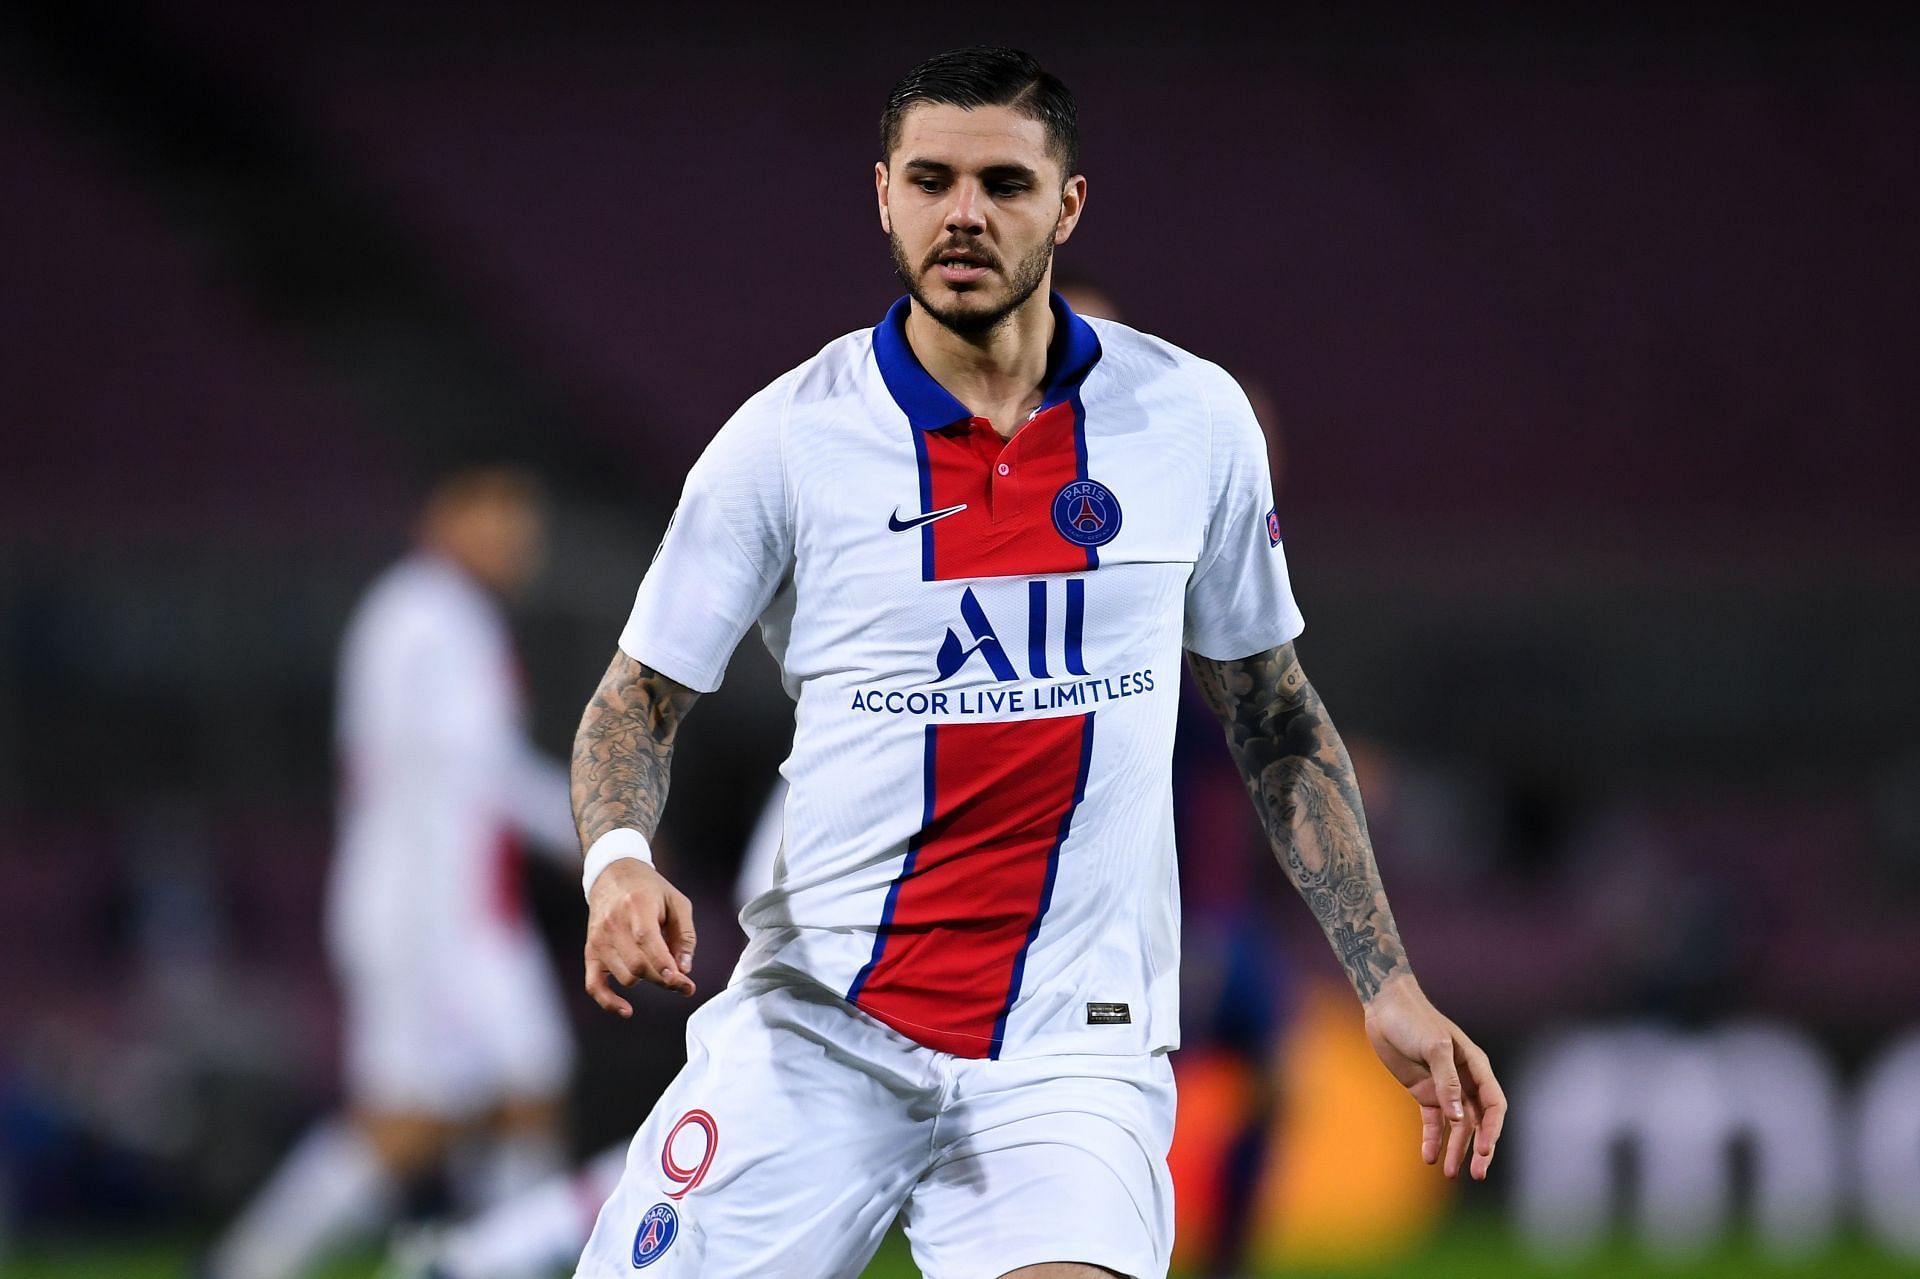 Mauro Icardi is likely to leave the Parc des Princes this summer